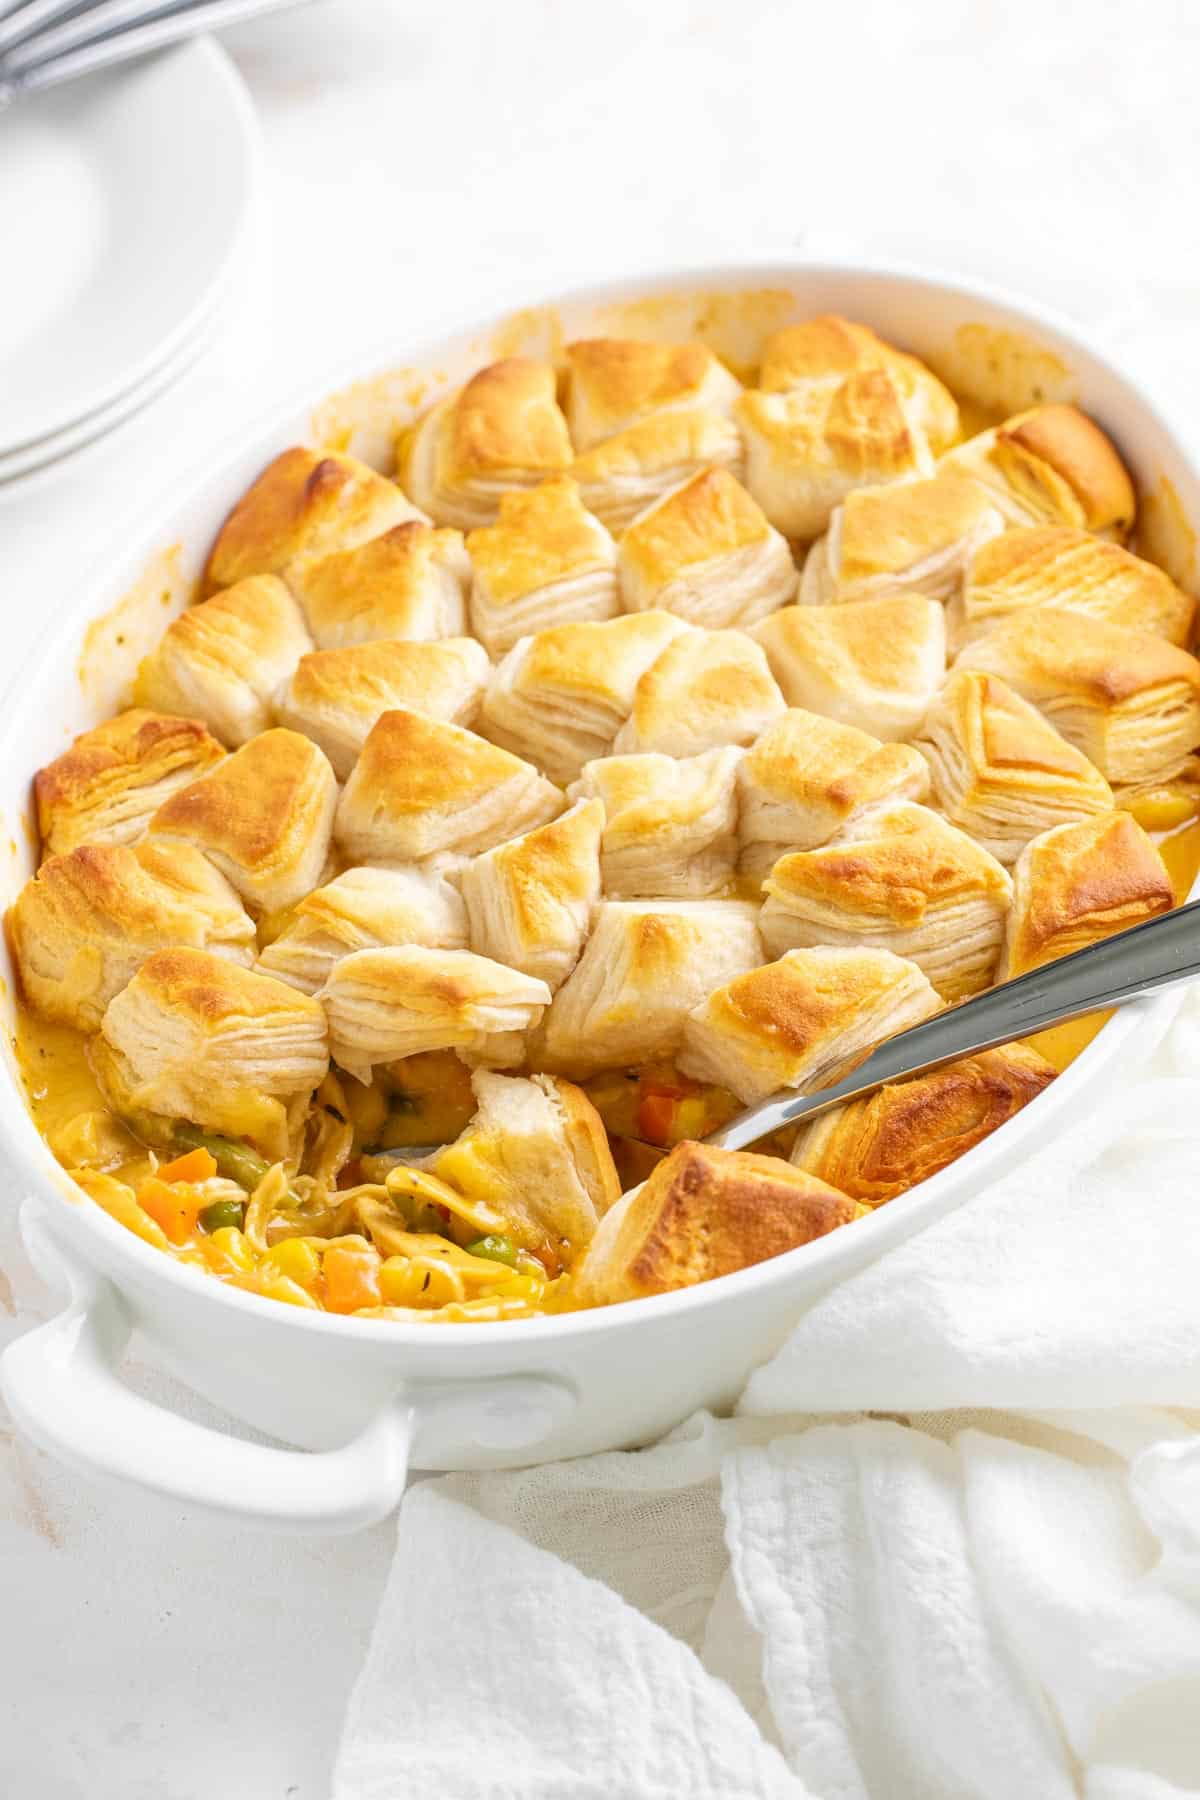 Cheesy chicken pot pie topped with quartered canned biscuits in an oval white baking dish with a serving spoon.